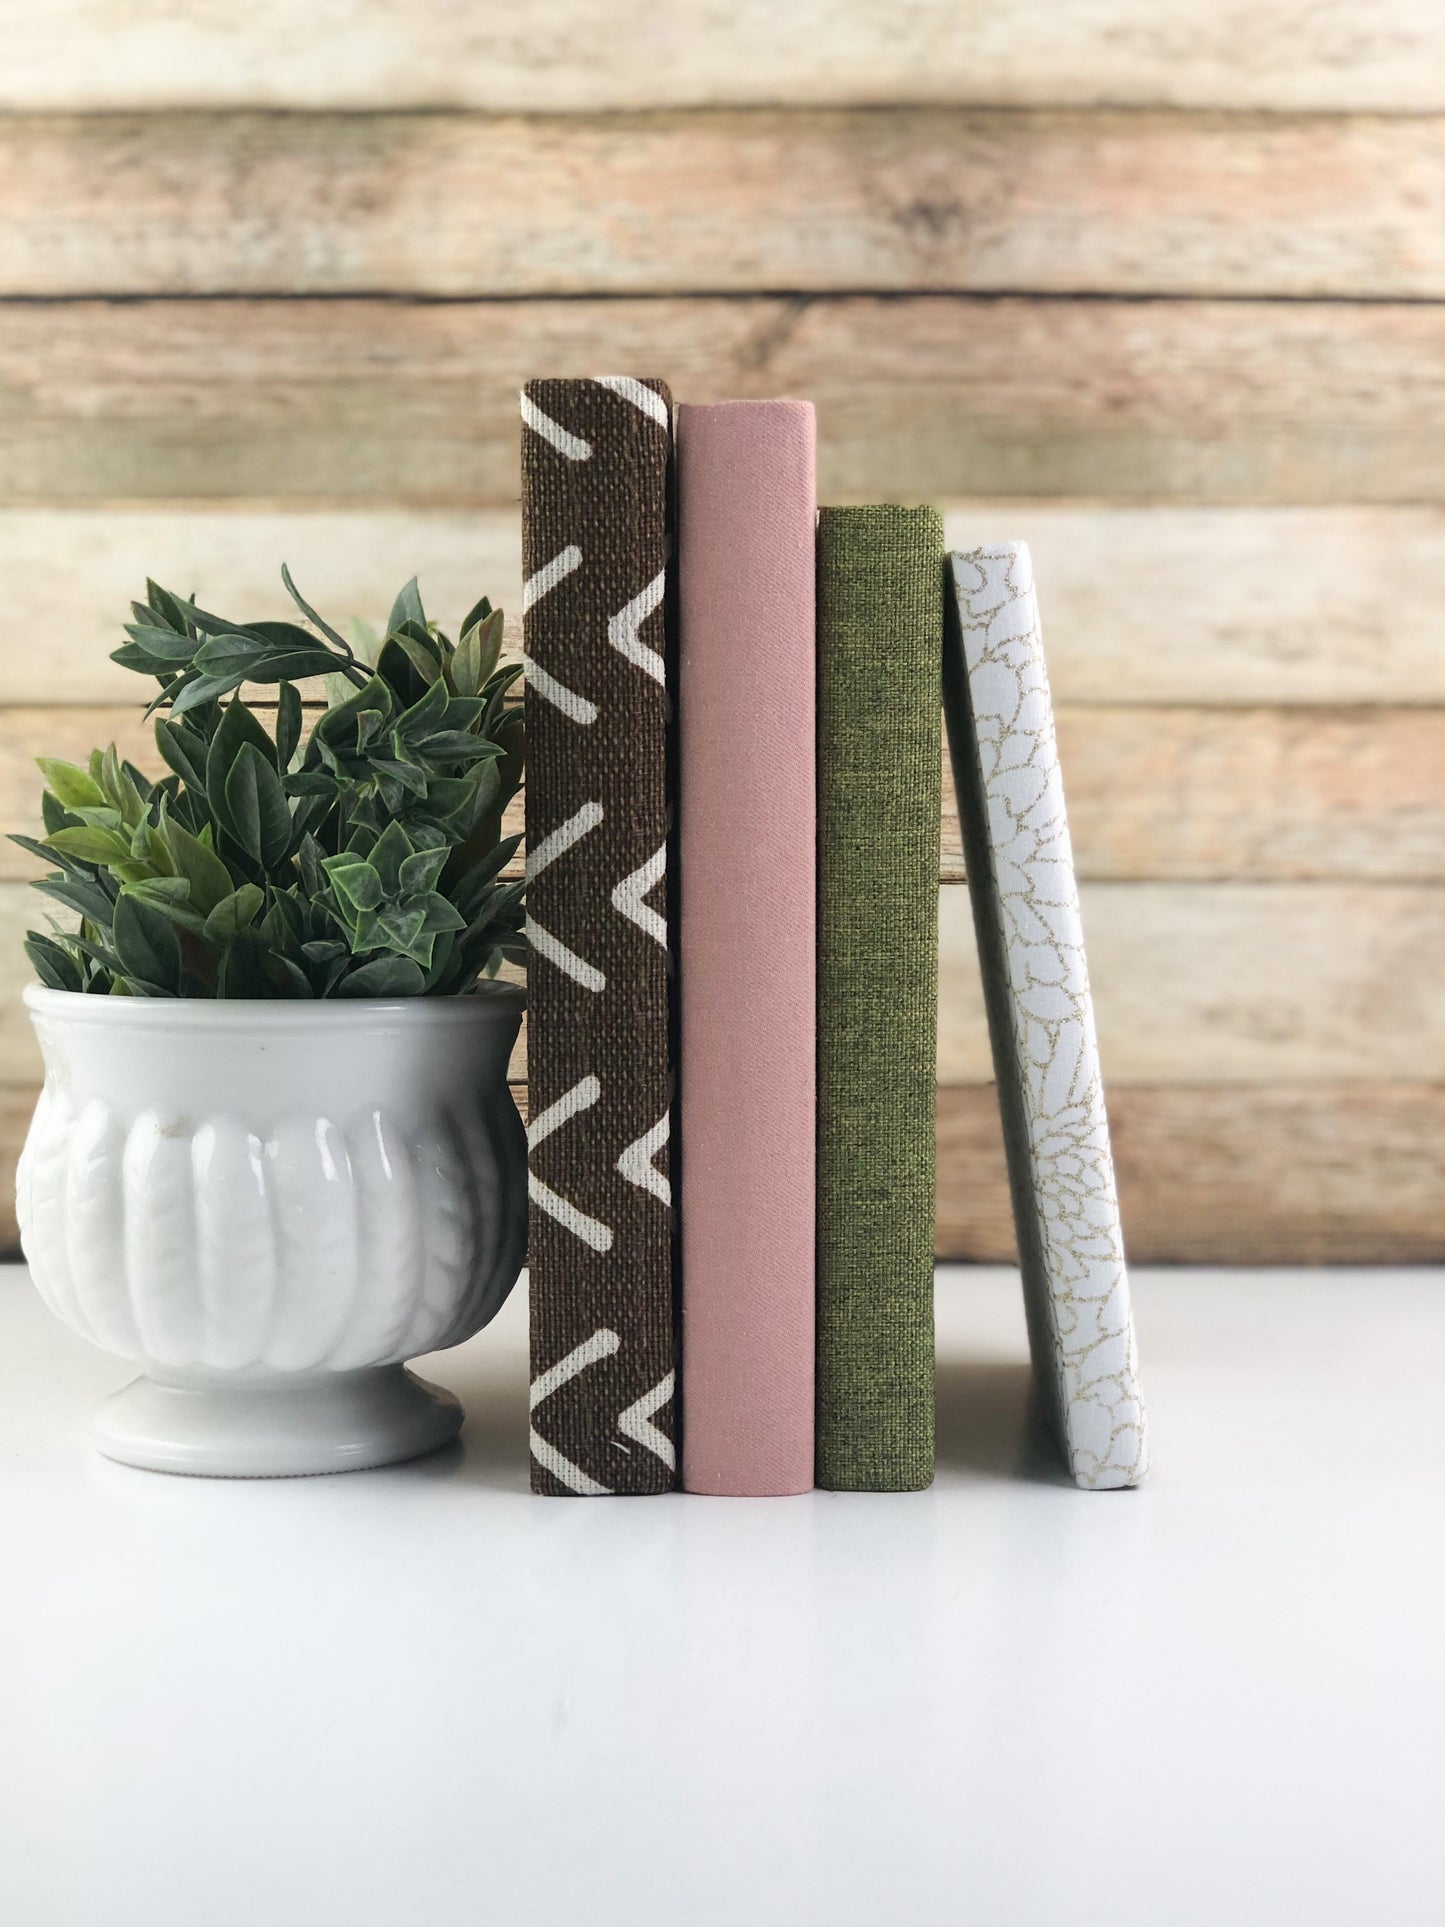 Fabric Covered Books / Pink and Brown